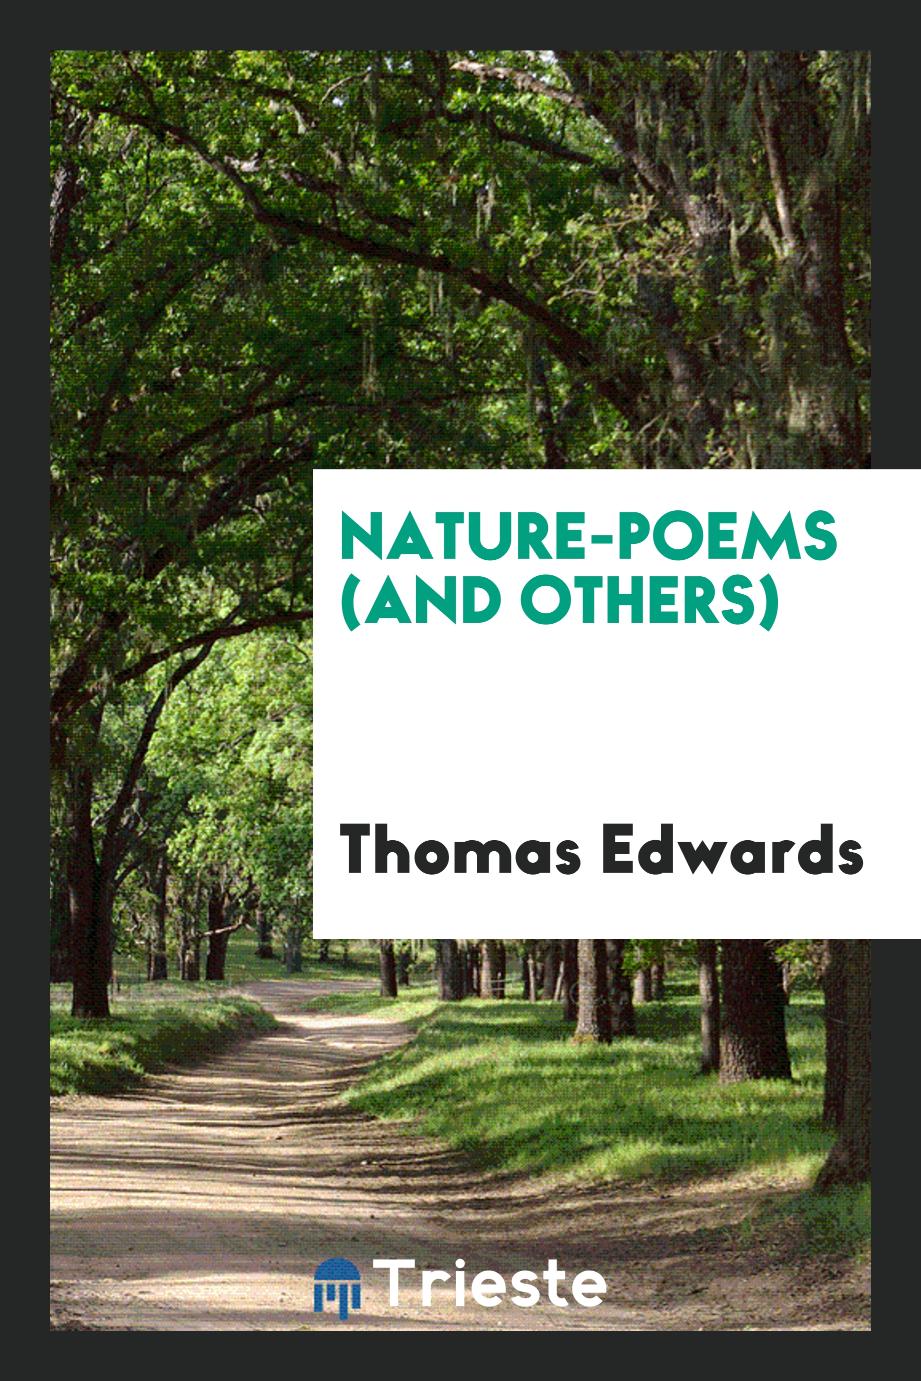 Nature-poems (and others)